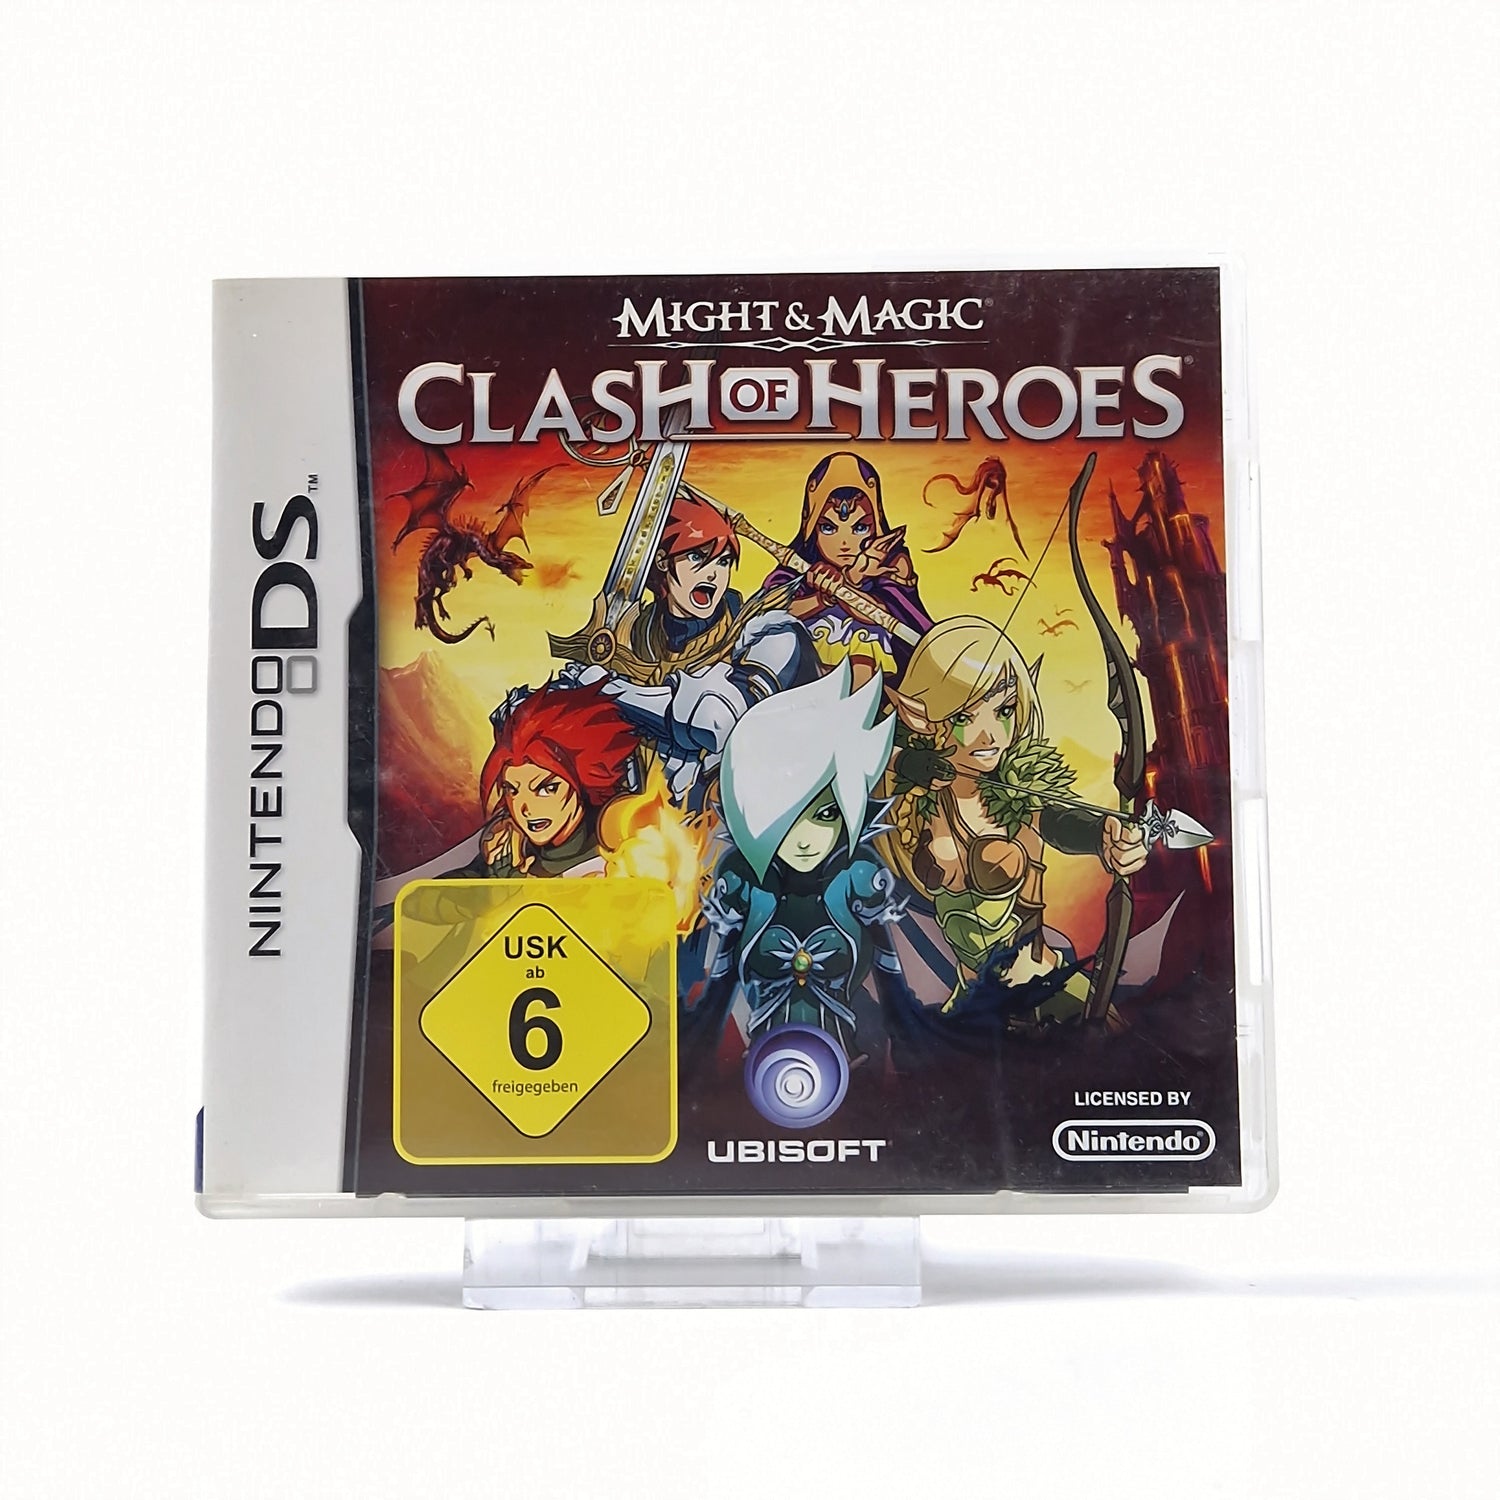 Nintendo DS Spiel : Might & Magic Clash of Heroes - OVP Anleitung PAL 3DS kompat